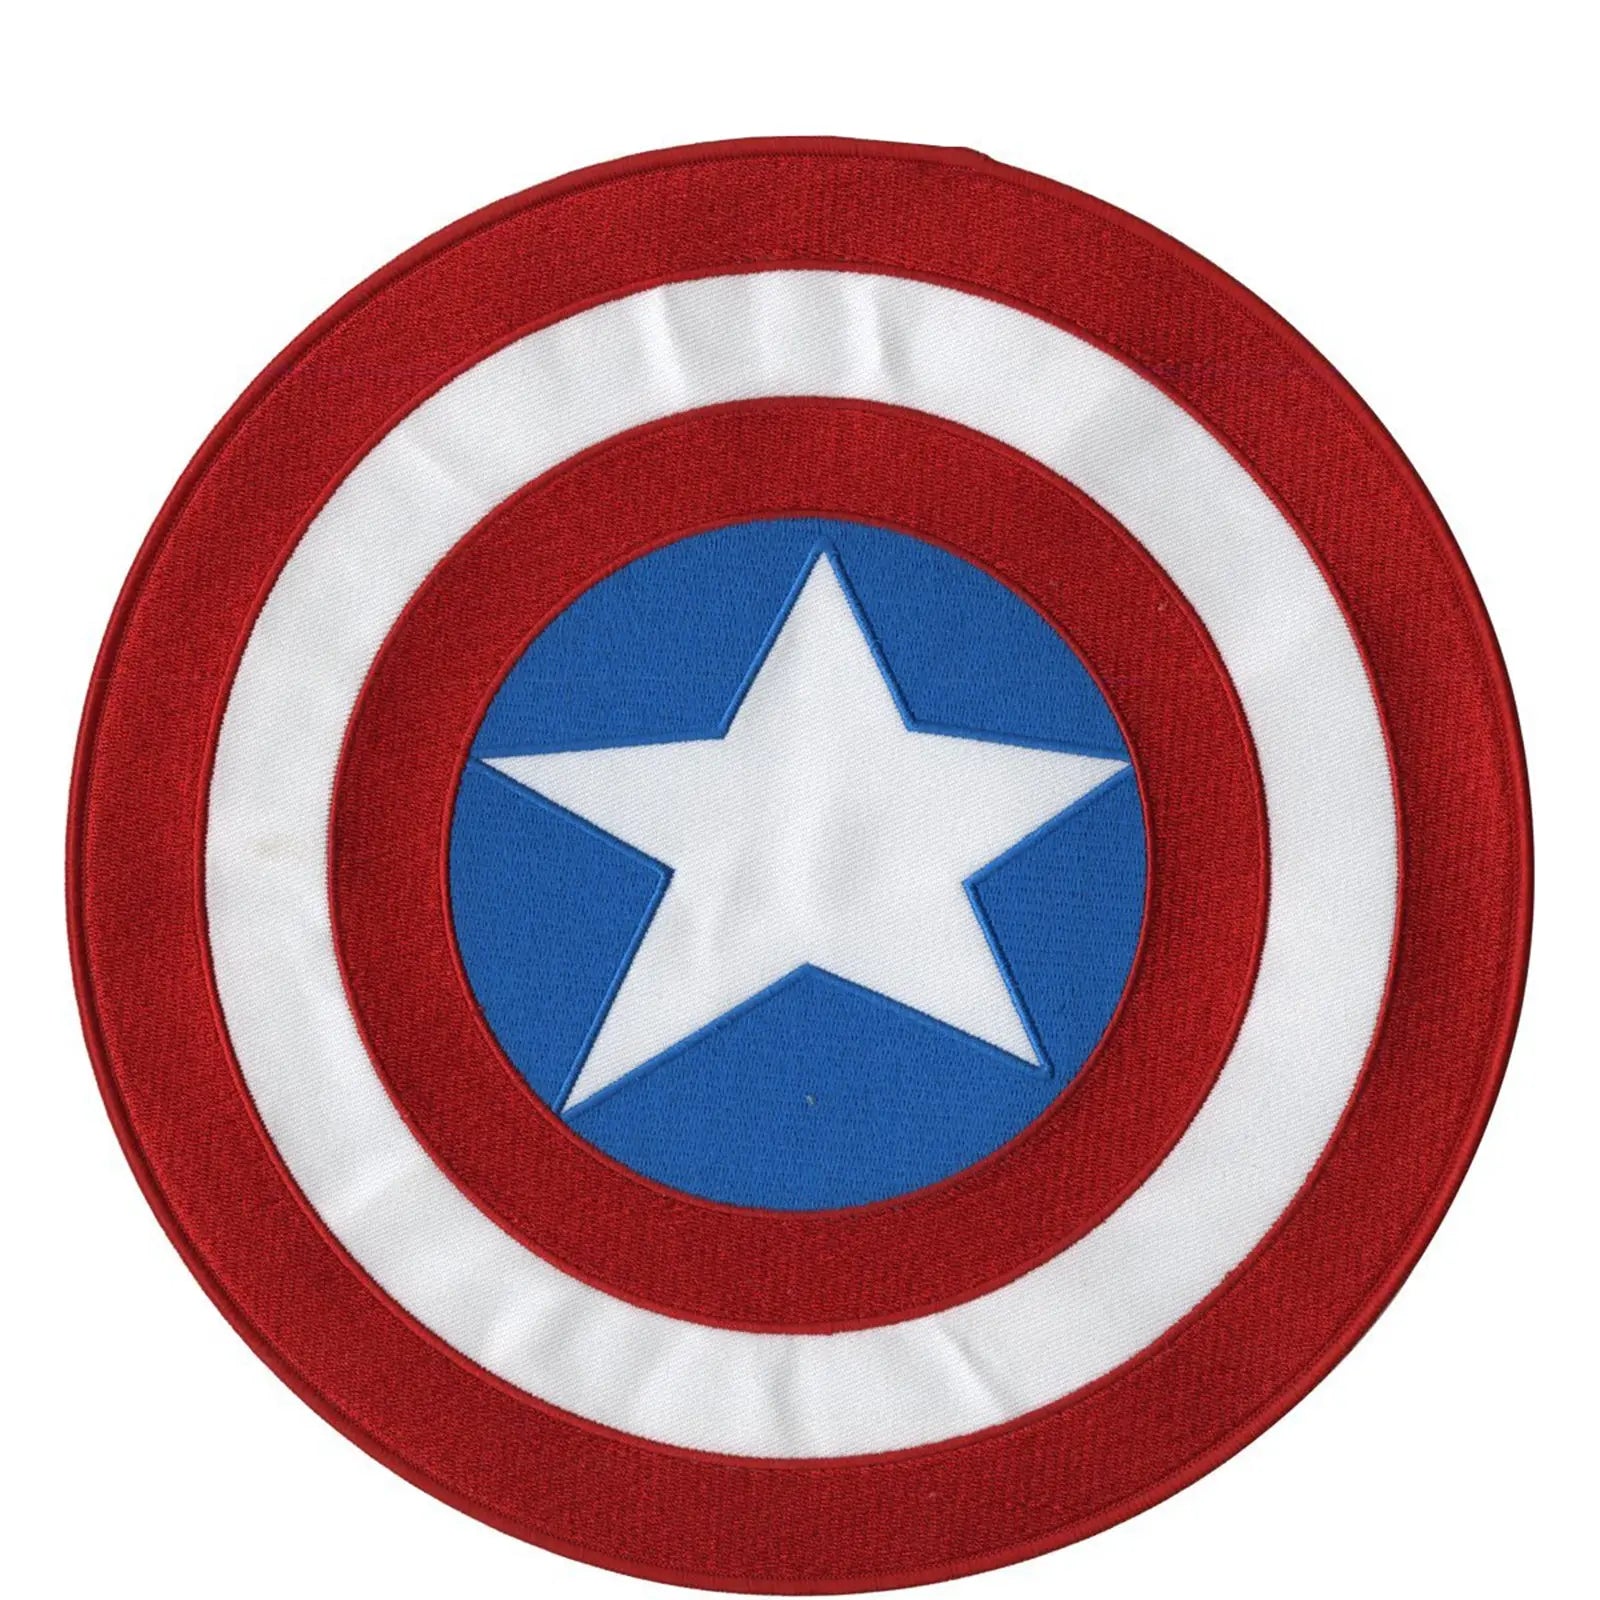 Yellow Captain C Patch Iron On for Football Jersey (Los Angeles)